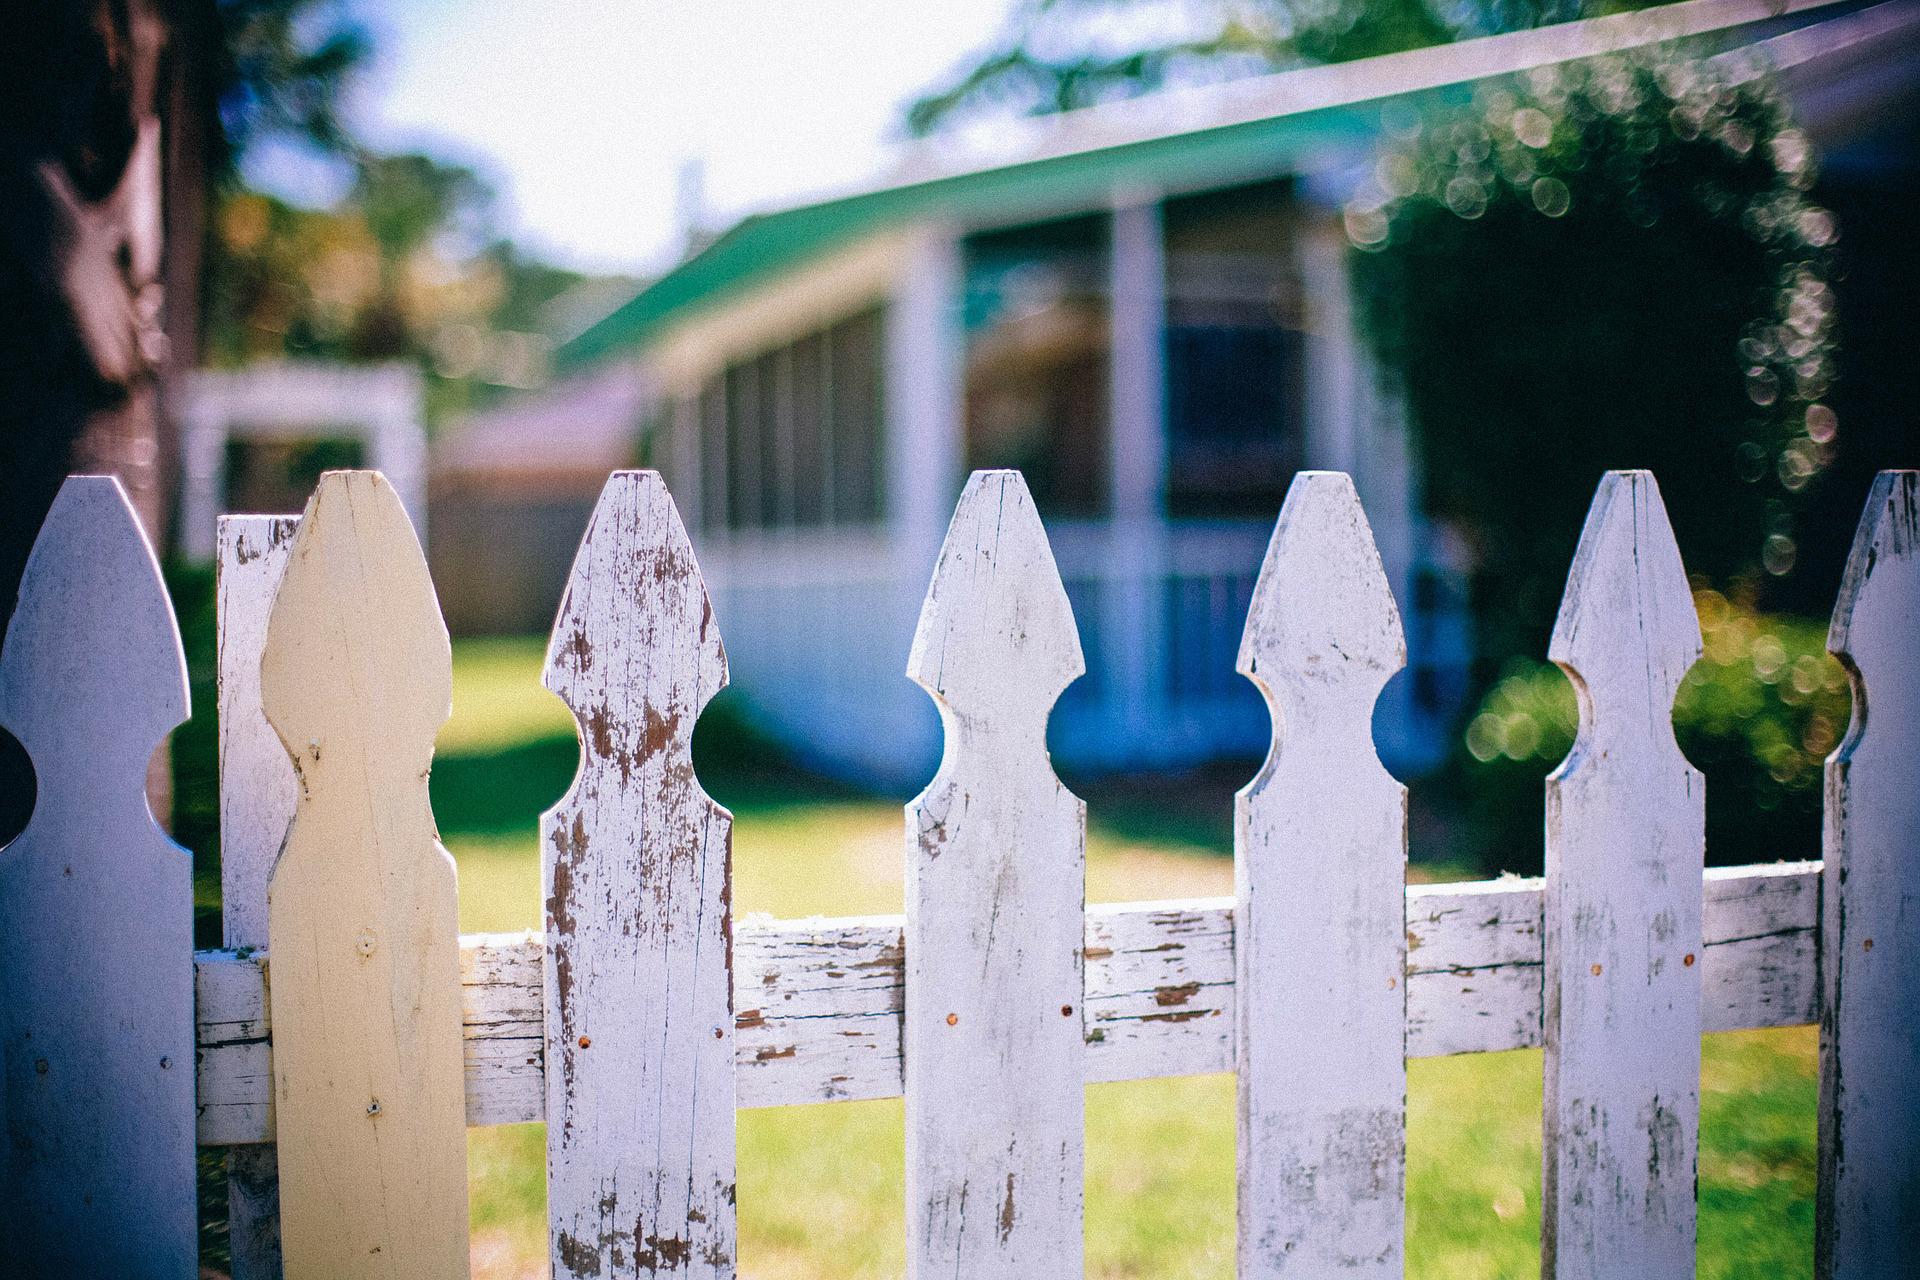 a picket fence between two gardens